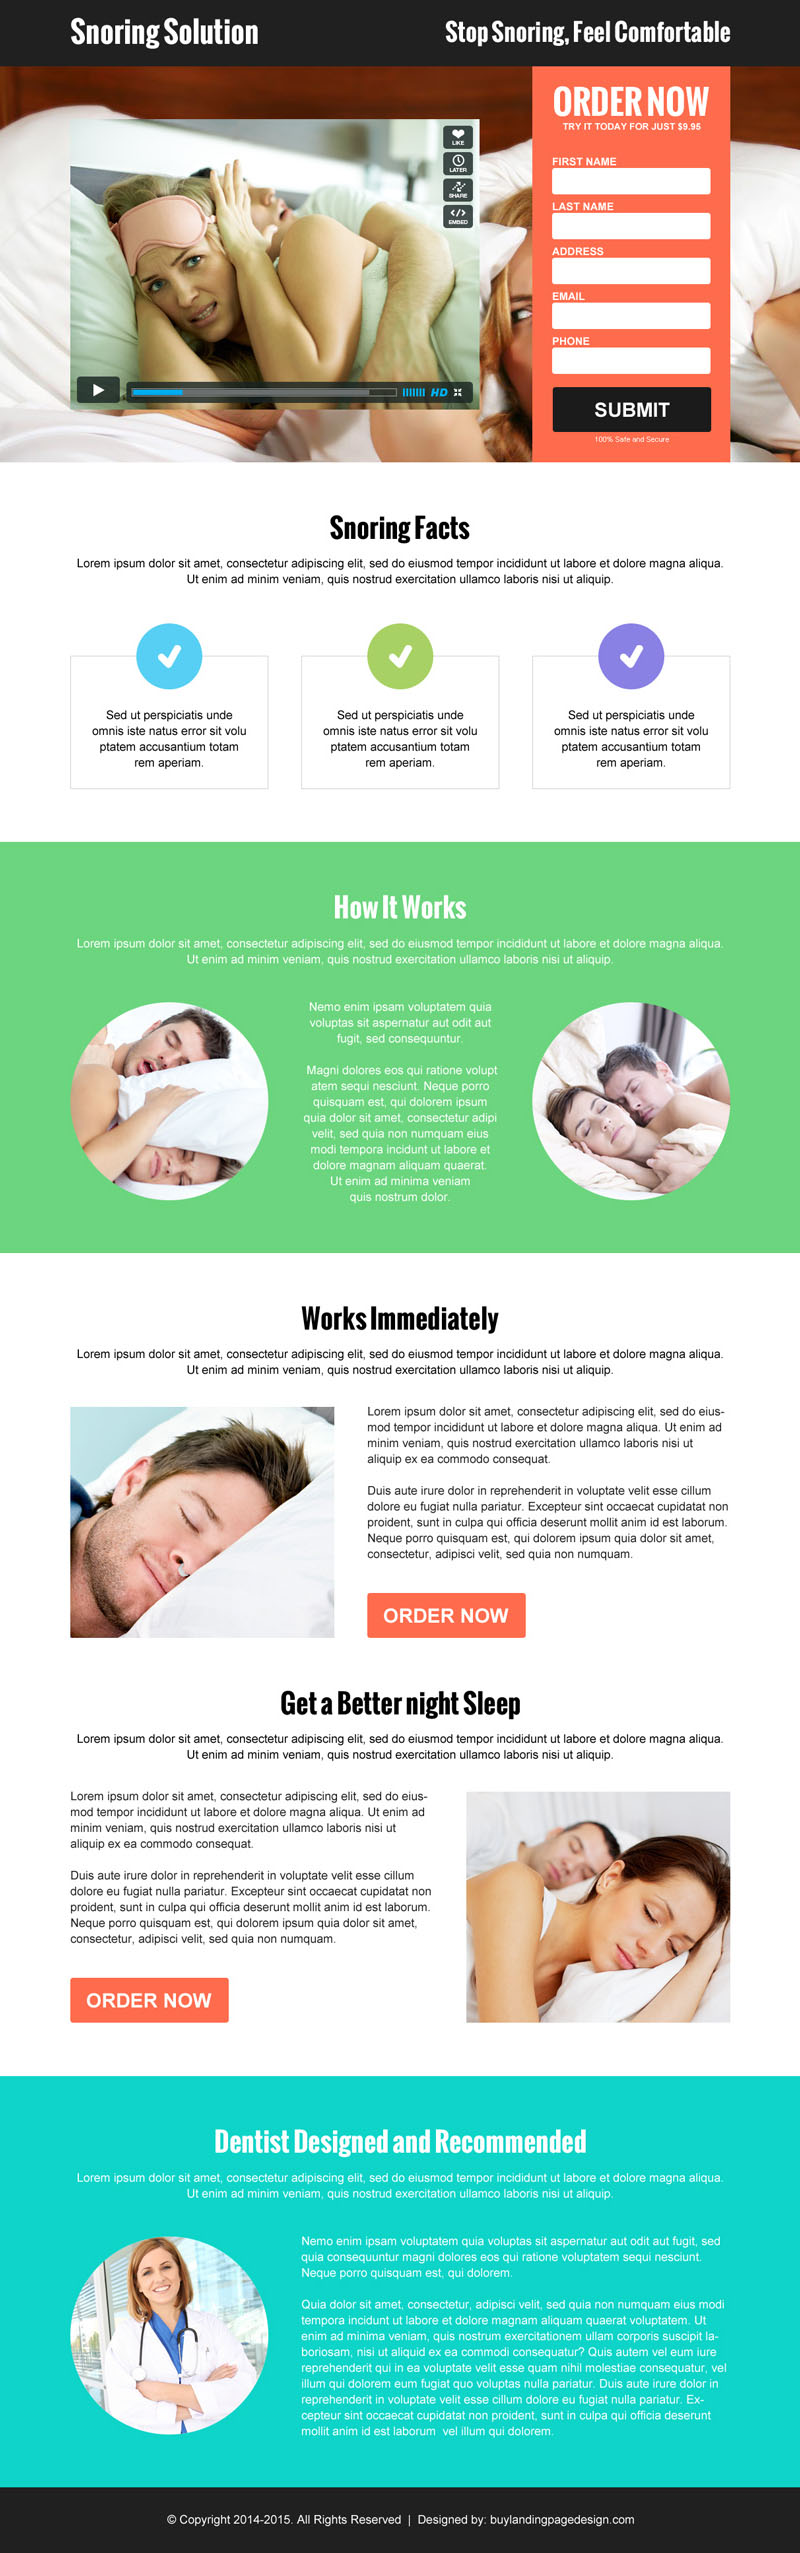 anti-snoring-product-selling-lead-capture-converting-video-landing-page-design-template-018